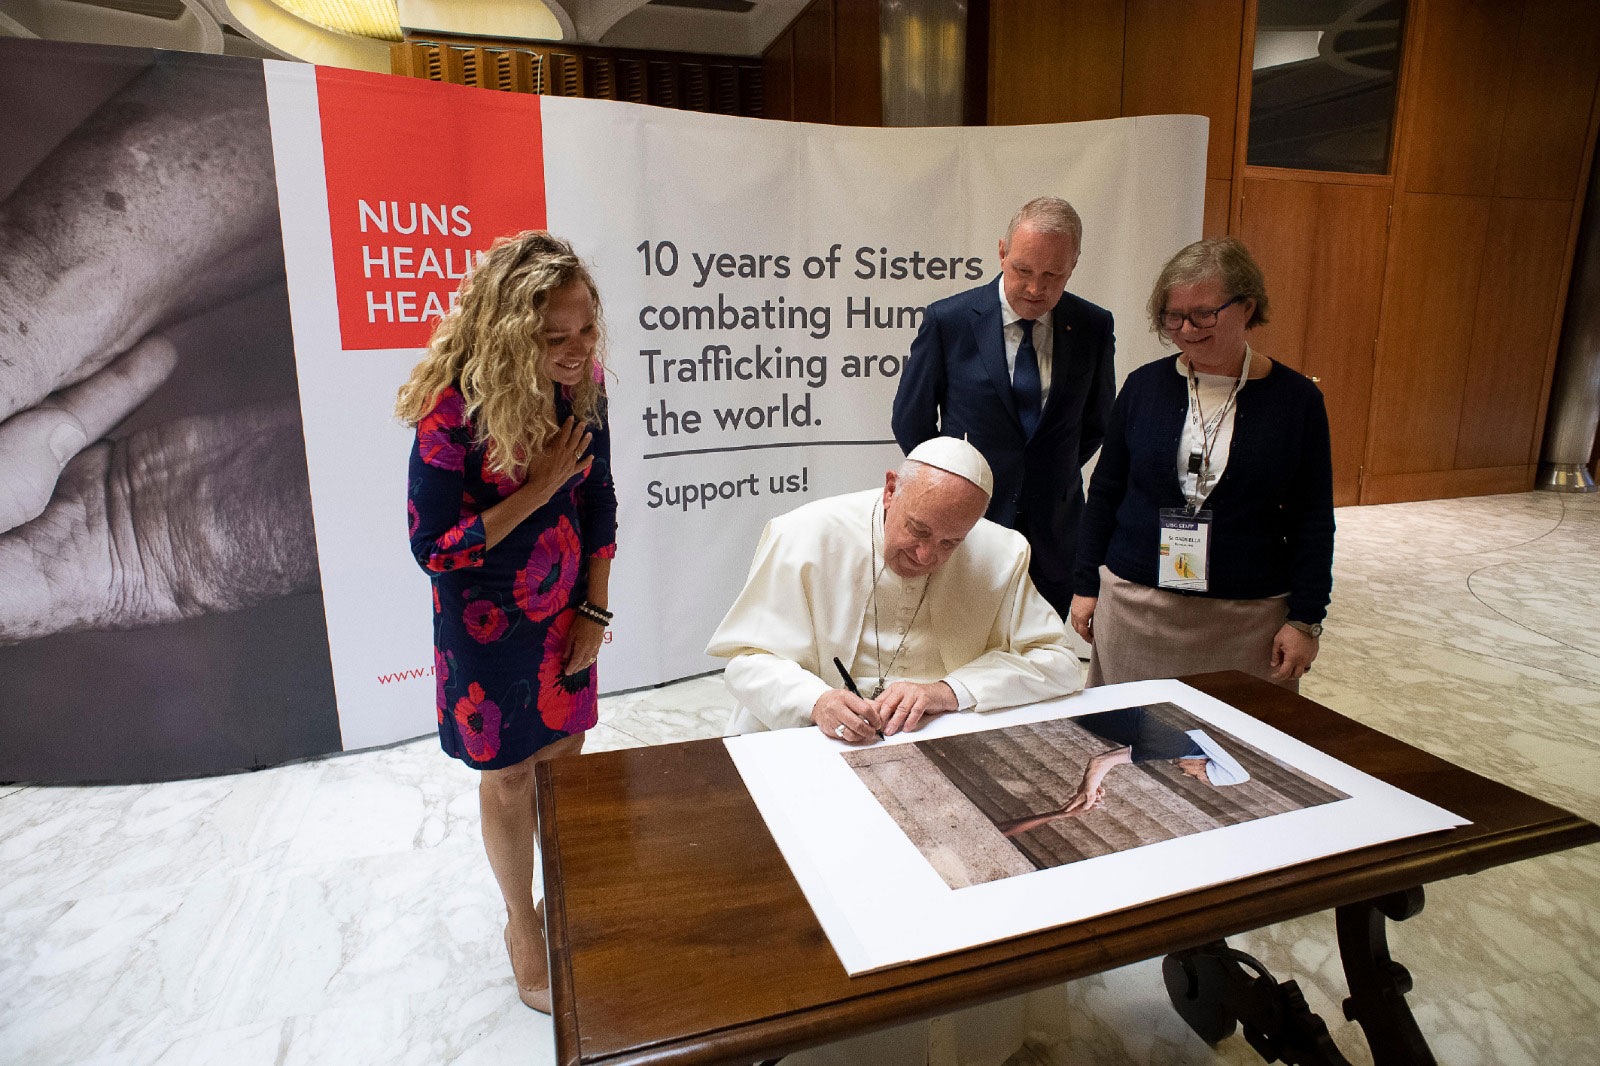 Pope Francis Signs Prints at the Vatican